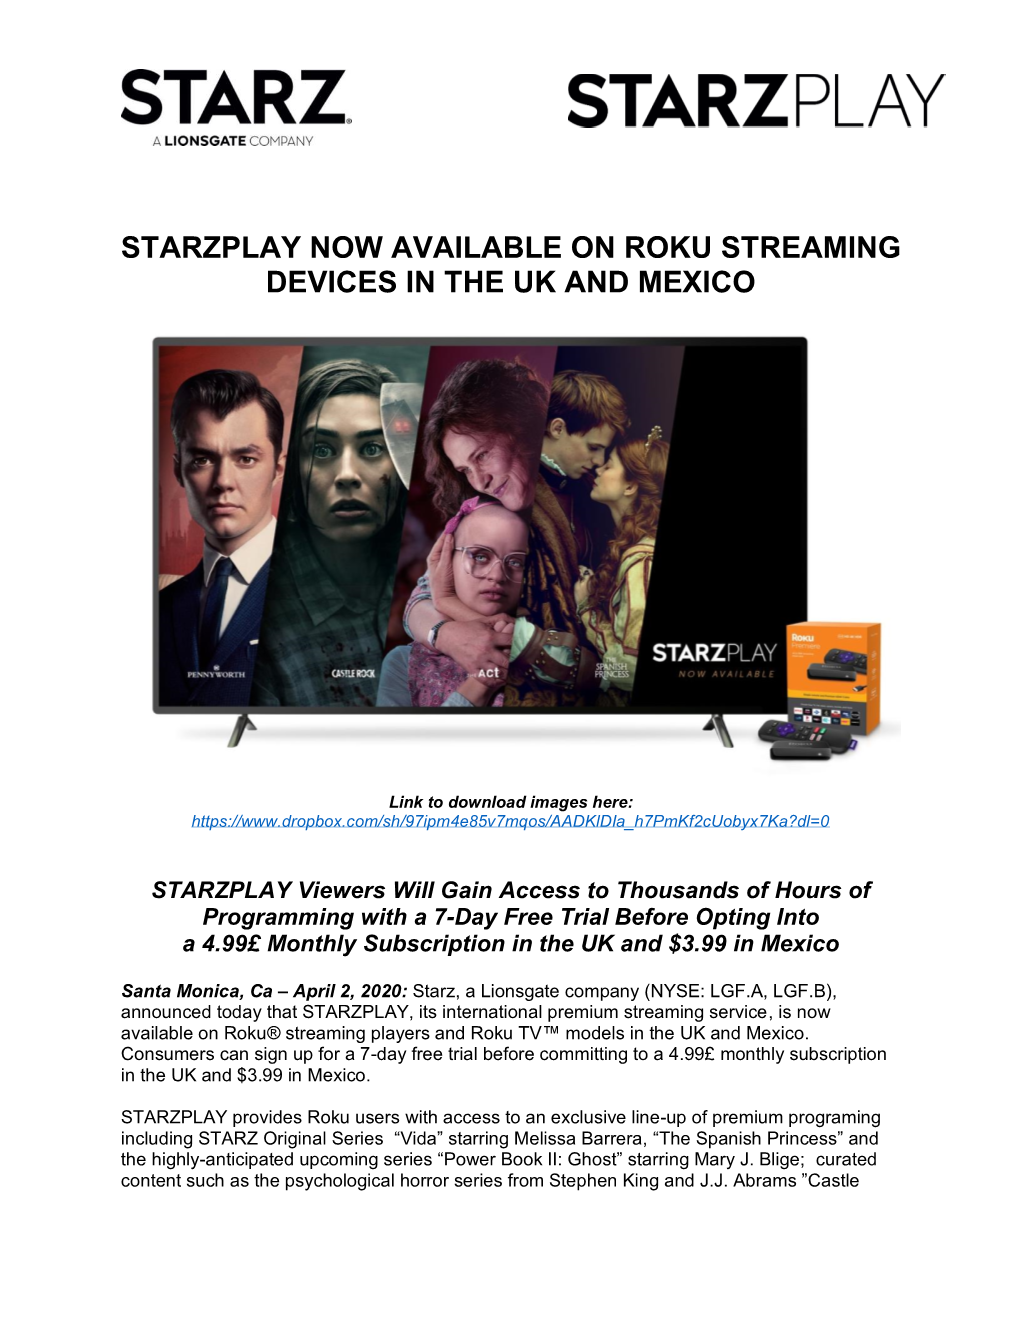 Starzplay Now Available on Roku Streaming Devices in the Uk and Mexico